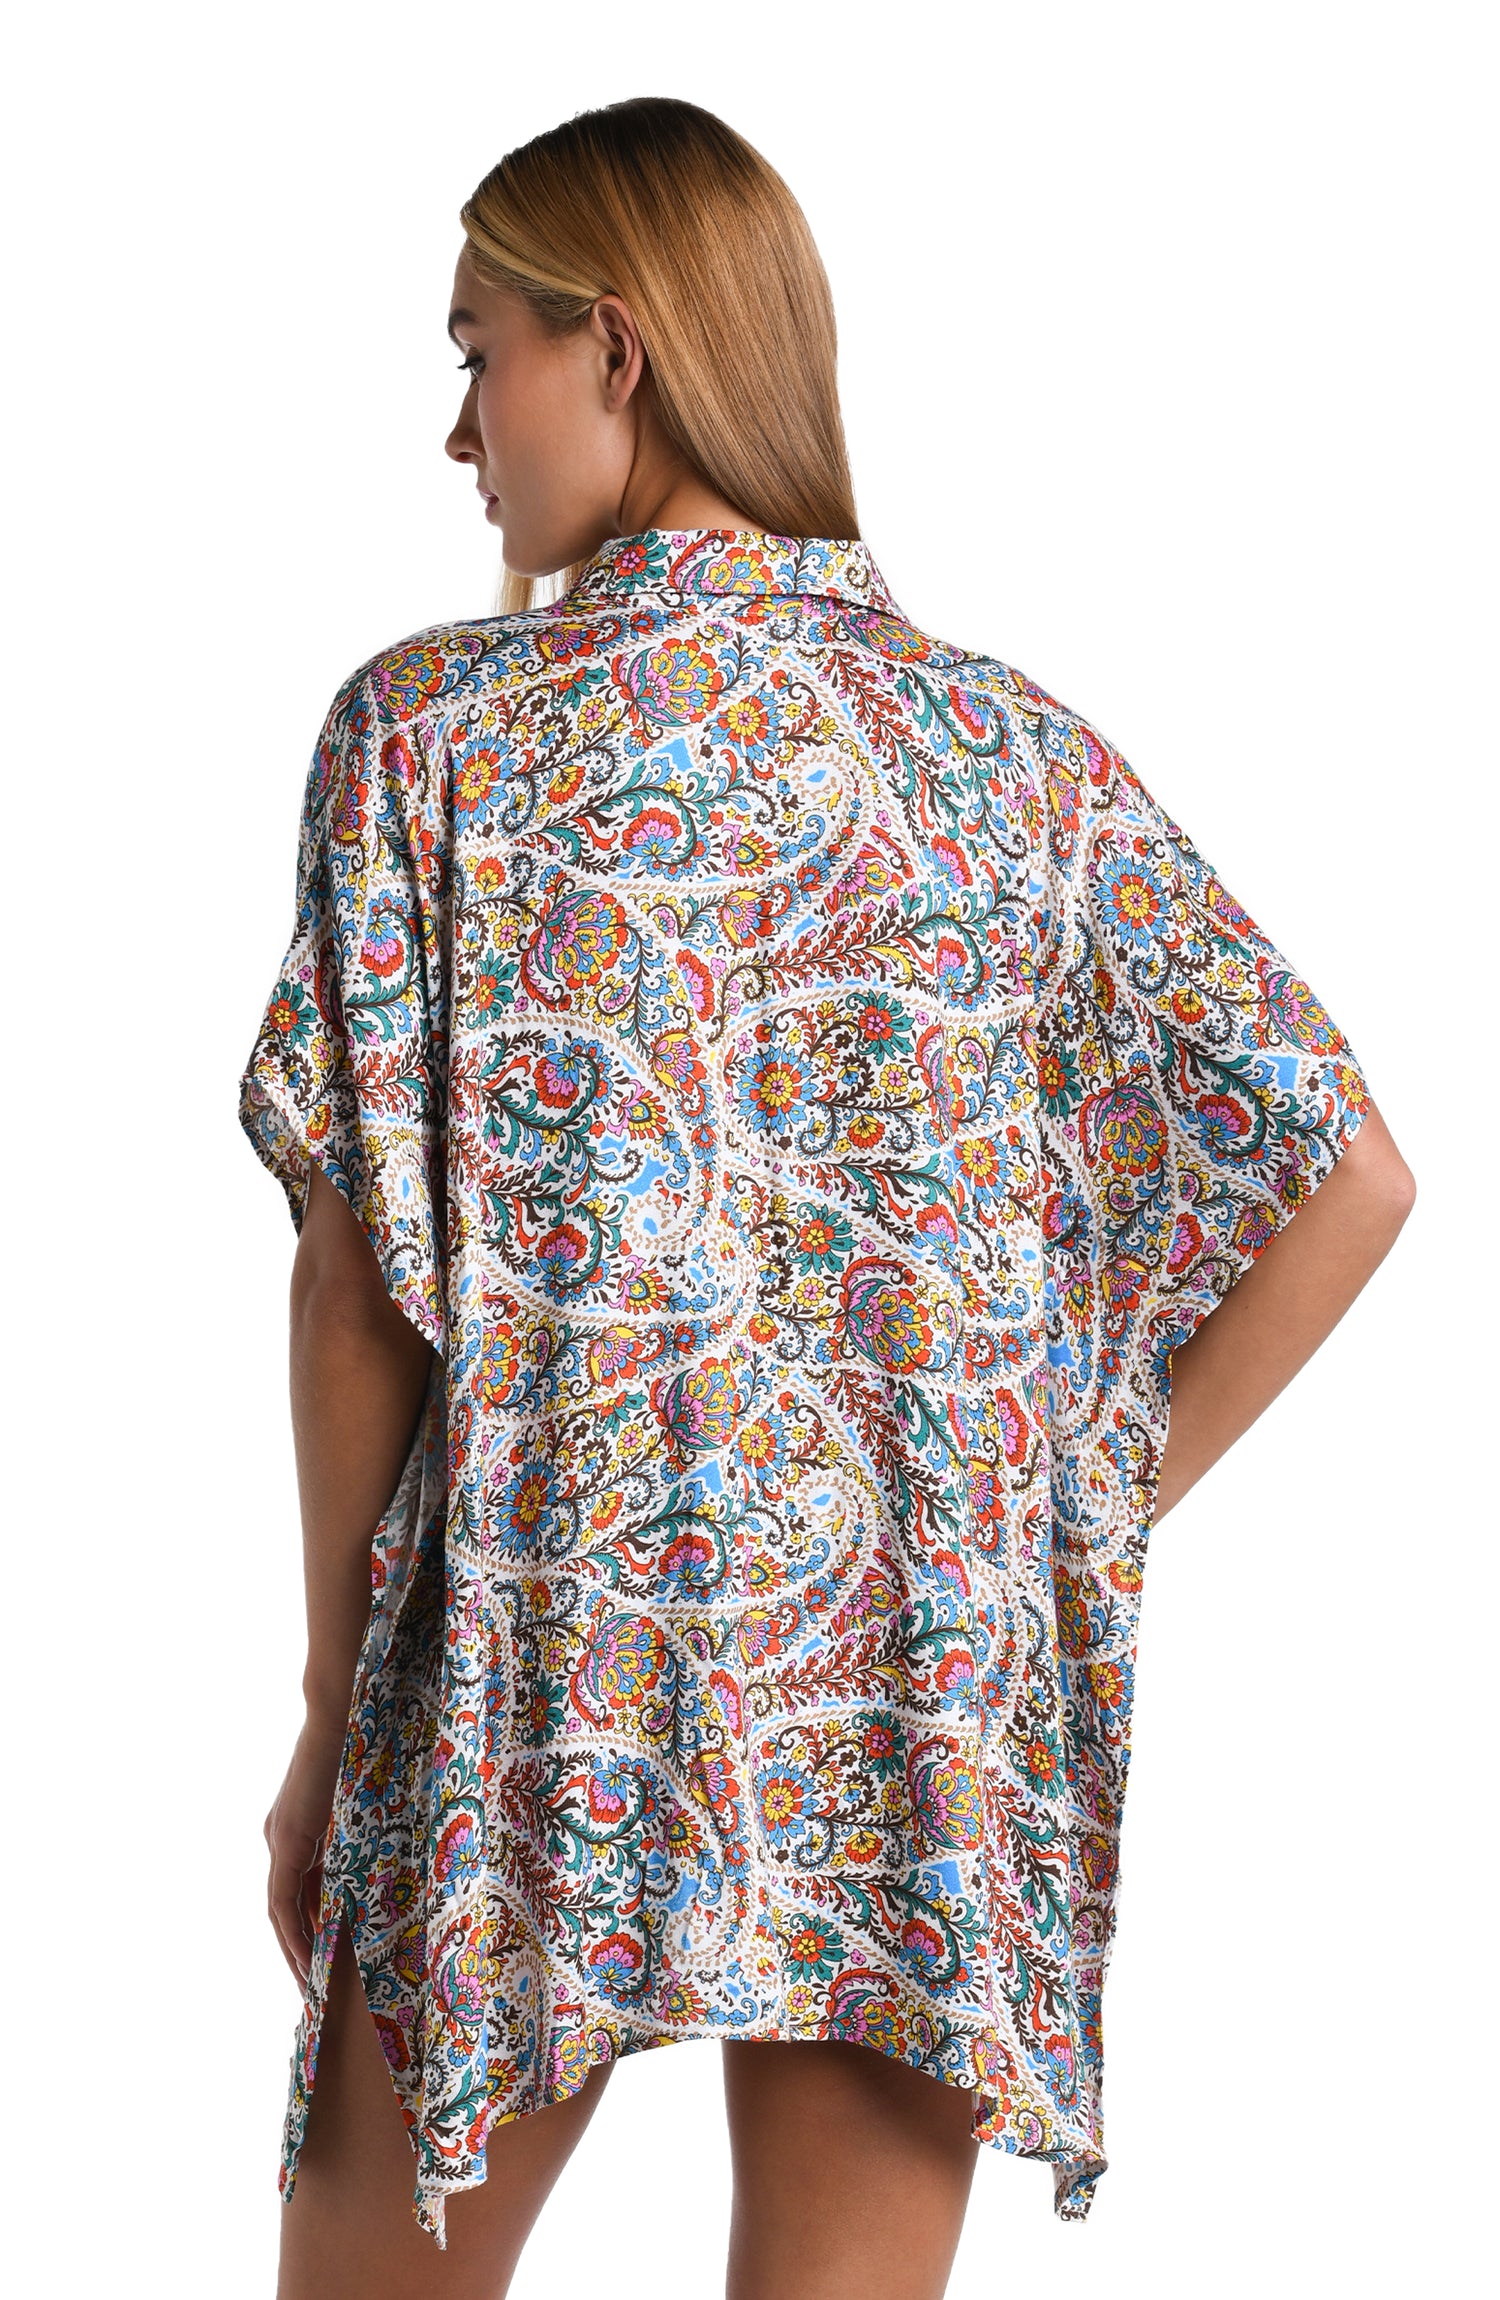 Model is wearing a white, red, blue, green, and yellow multicolored paisley printed Resort Shirt Cover Up